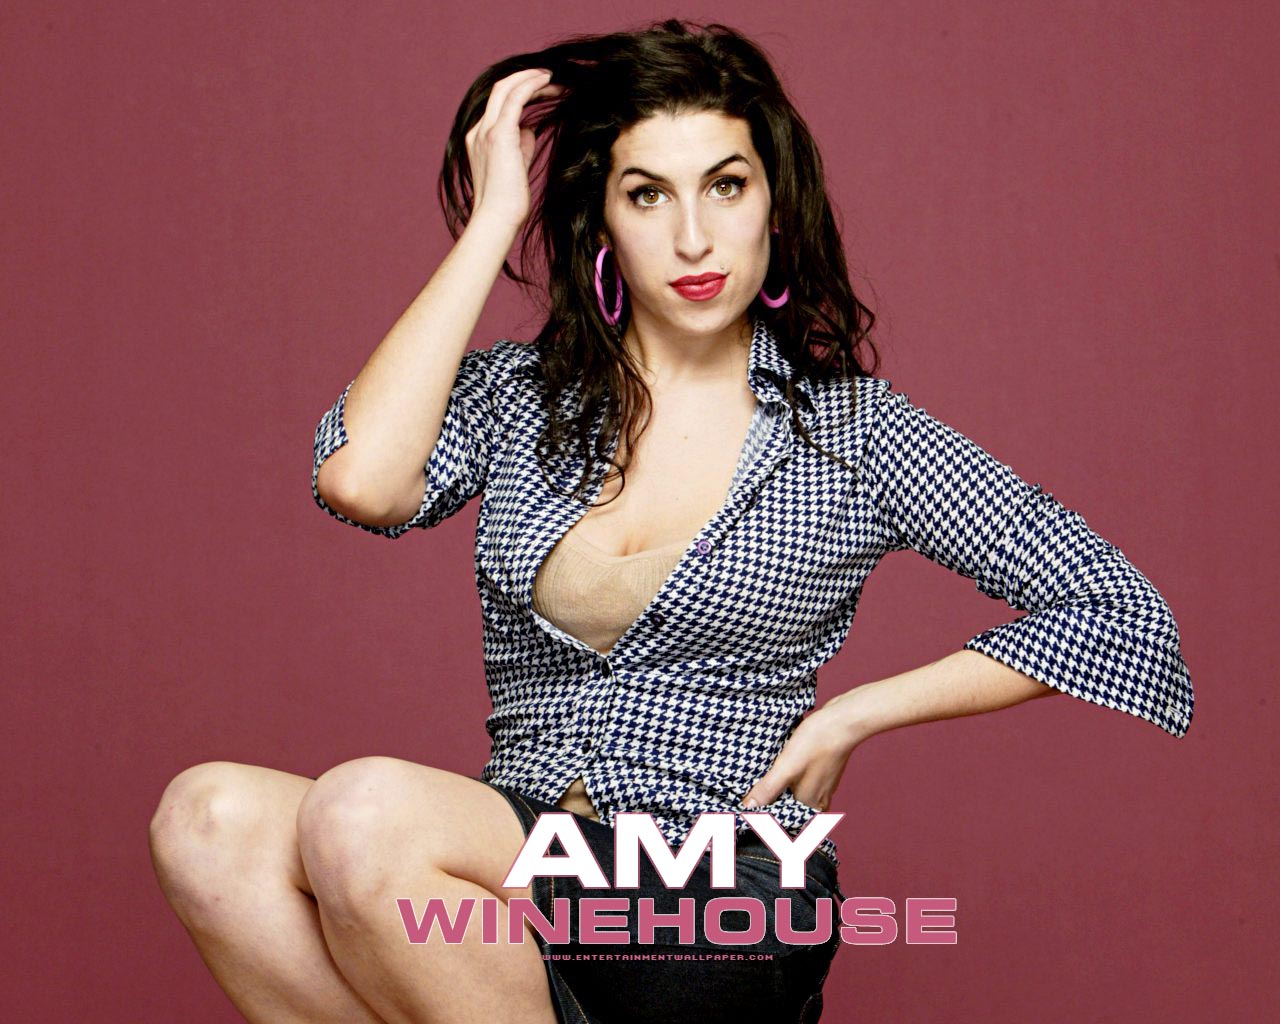 Amy Winehouse - Images Gallery